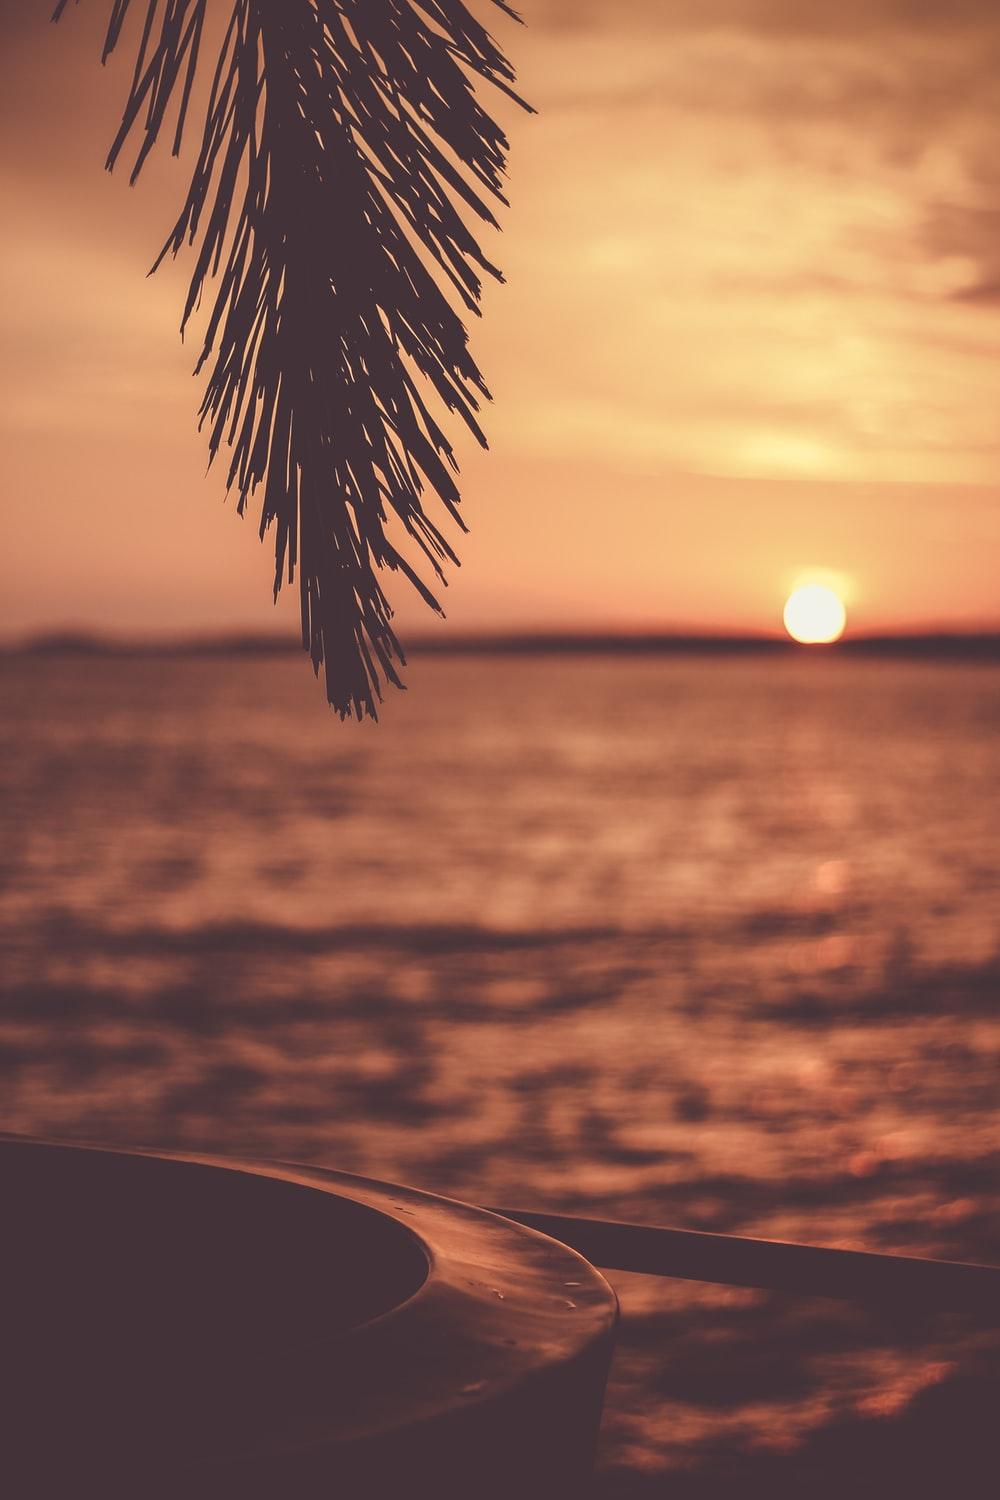 Stunning Tropical Sunset Picture [HD]. Download Free Image